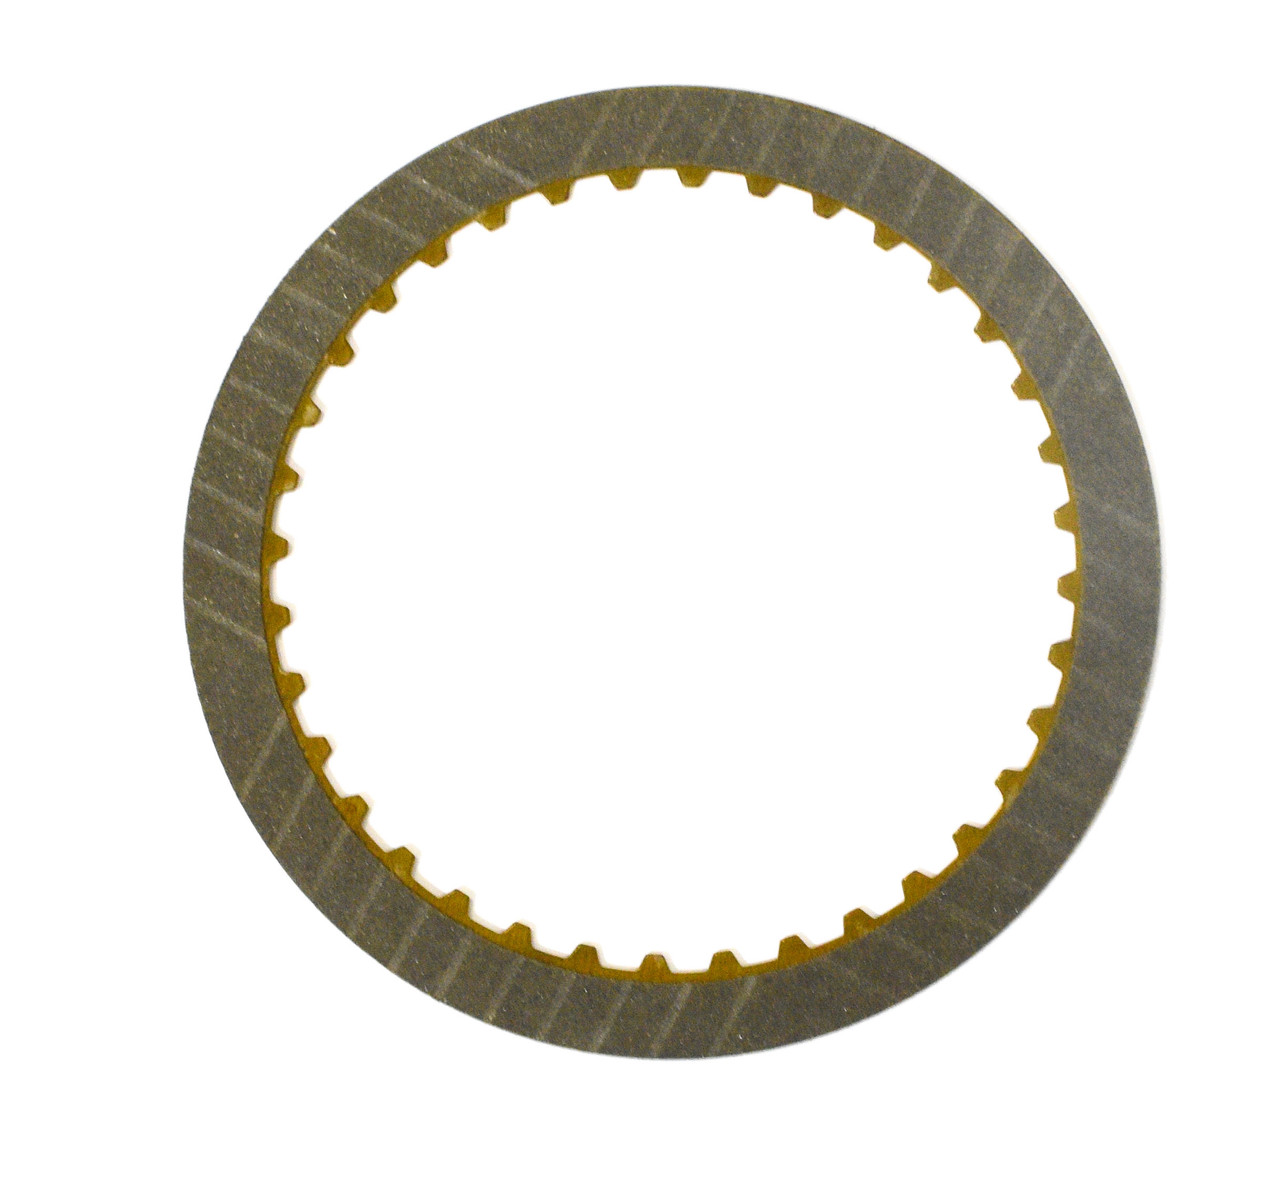 6L80 6L90 4-5-6 Friction Clutch Plate (2006-UP) High-Energy